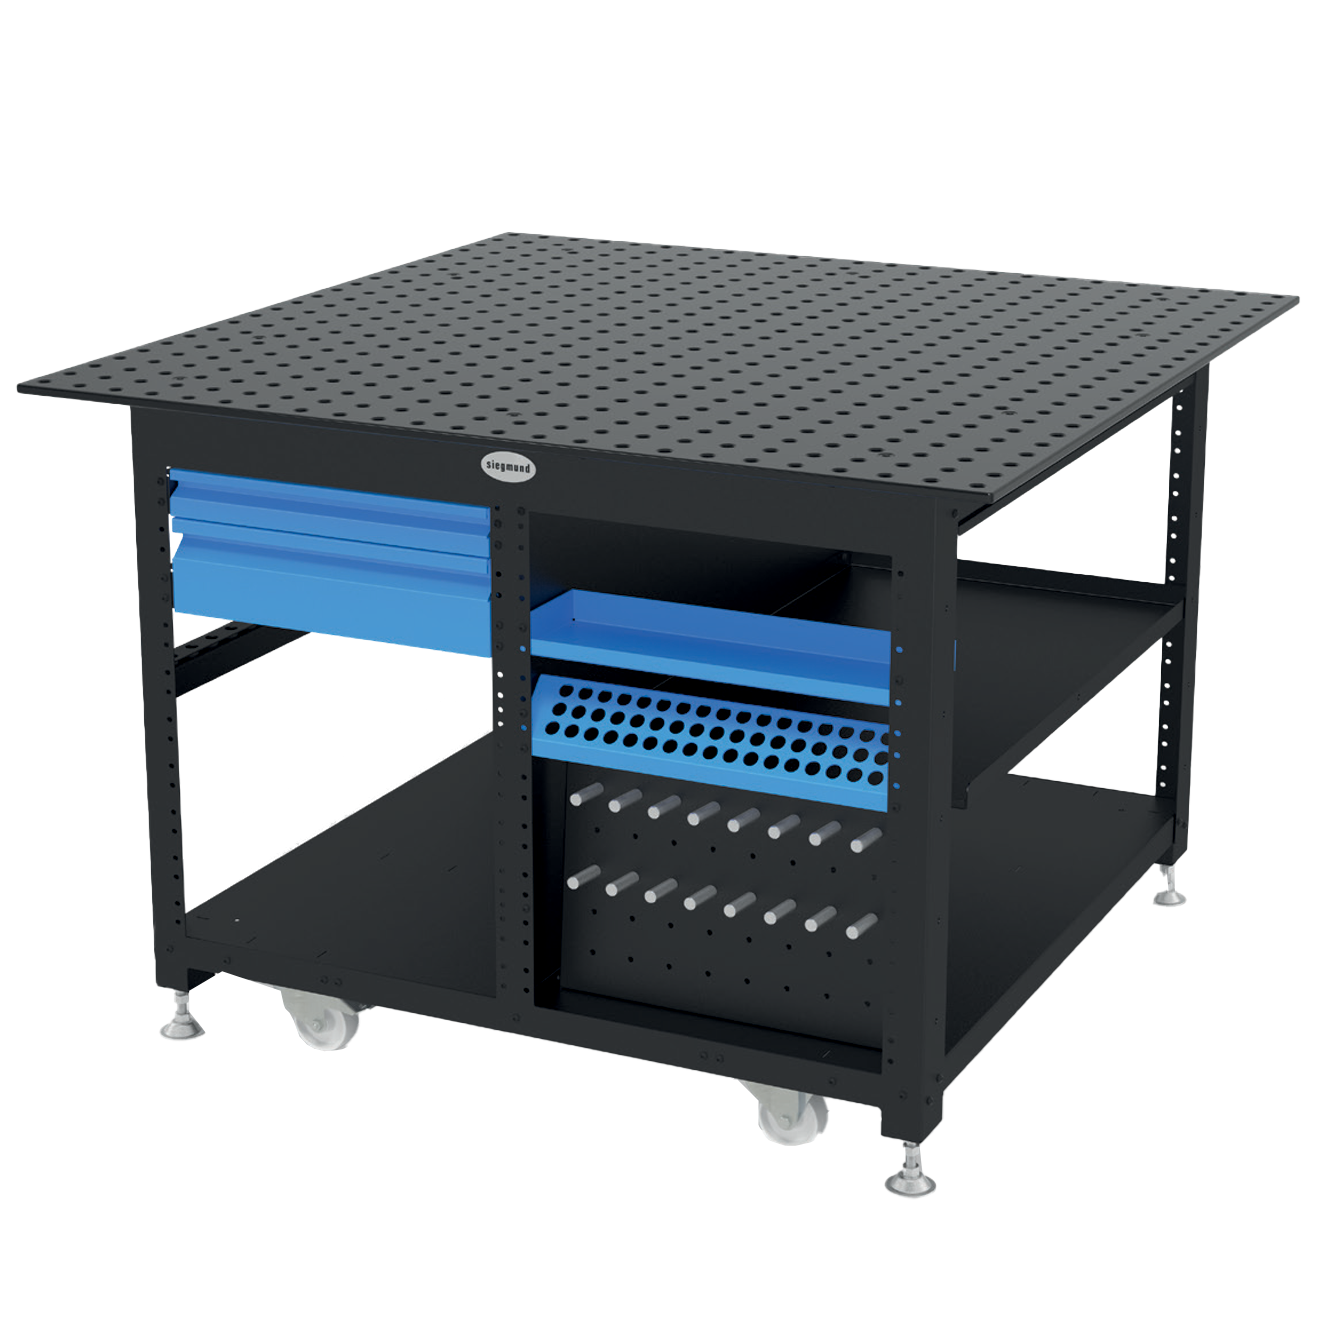 US167623: System 16 Workstation with "Set A" Including 4'x4' (48"x48") Perforated Plate (Siegmund Imperial Series)